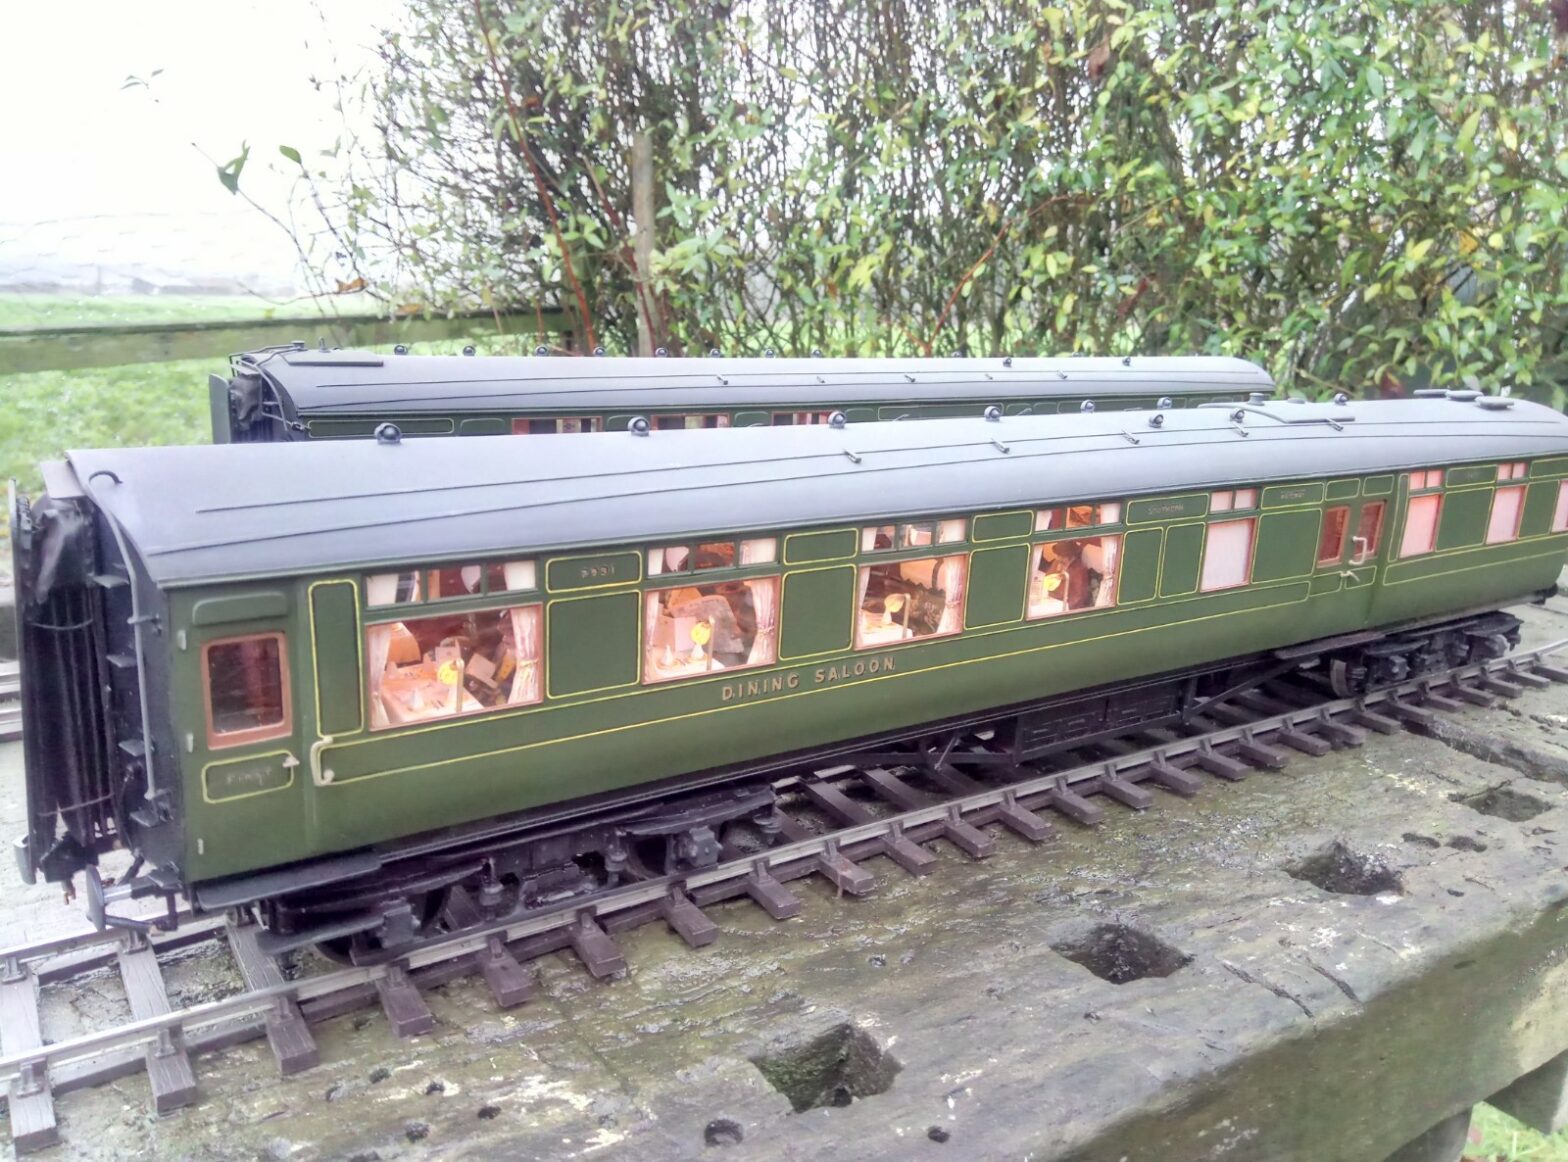 S.R. Maunsell Dining car